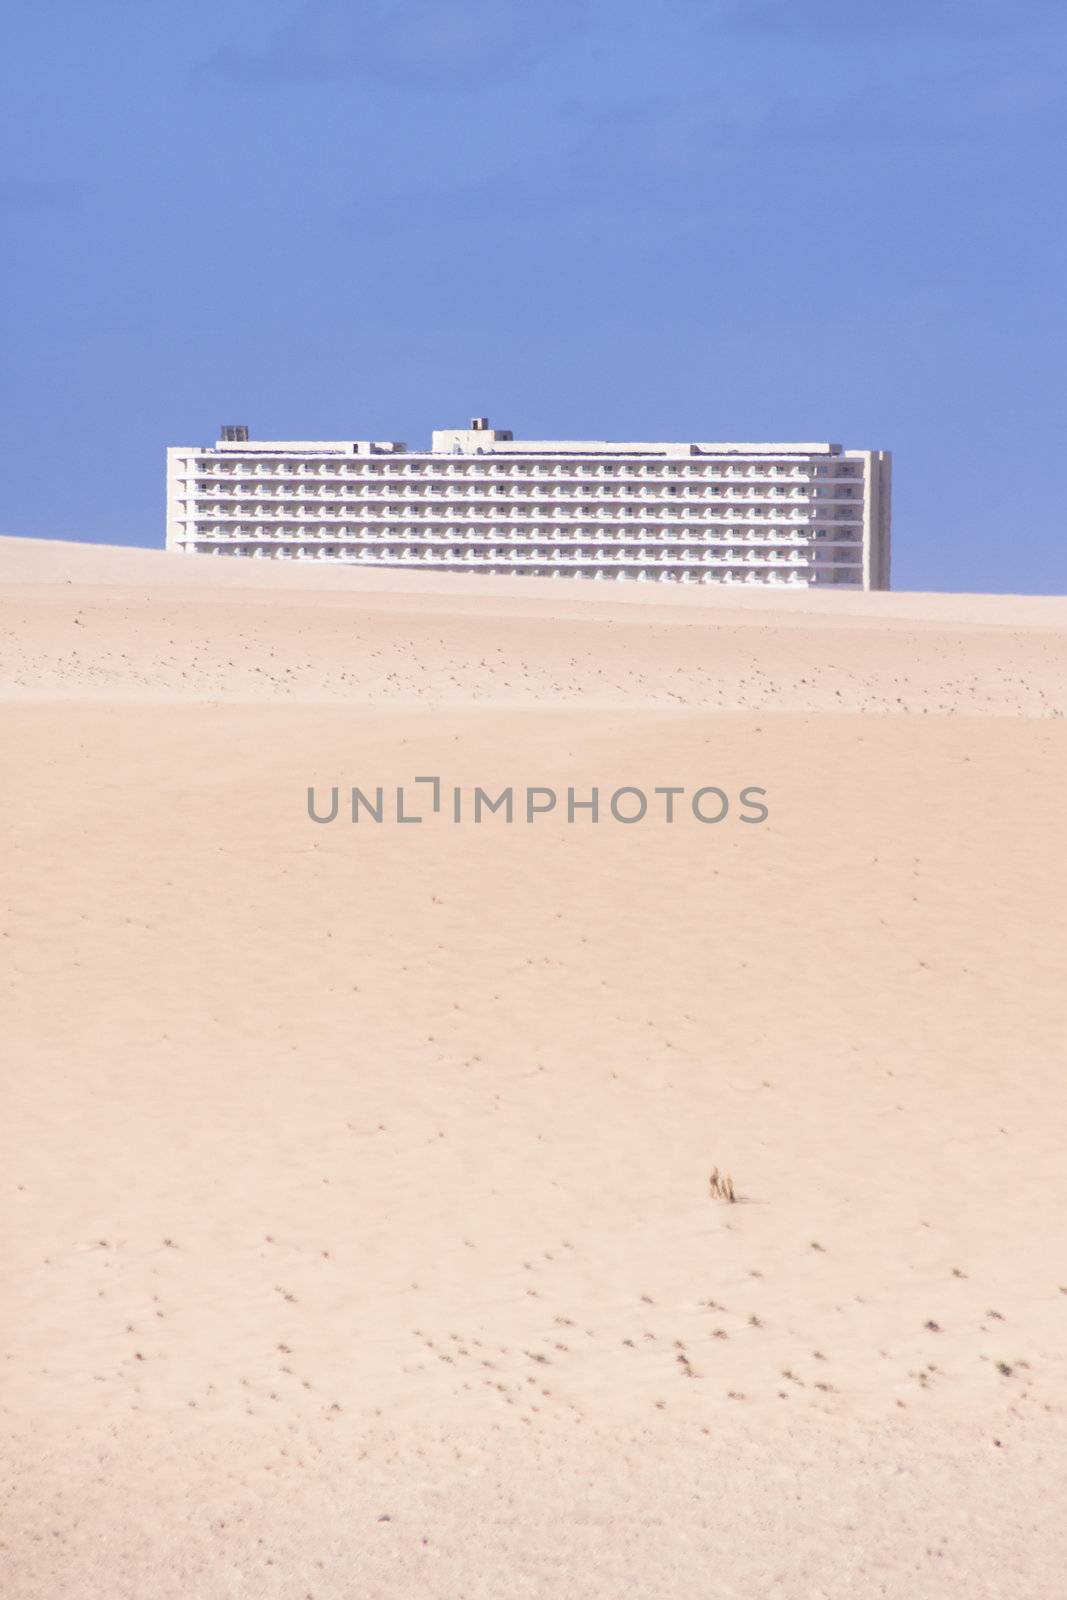 Modern hotel in the midle of the sandy desert.